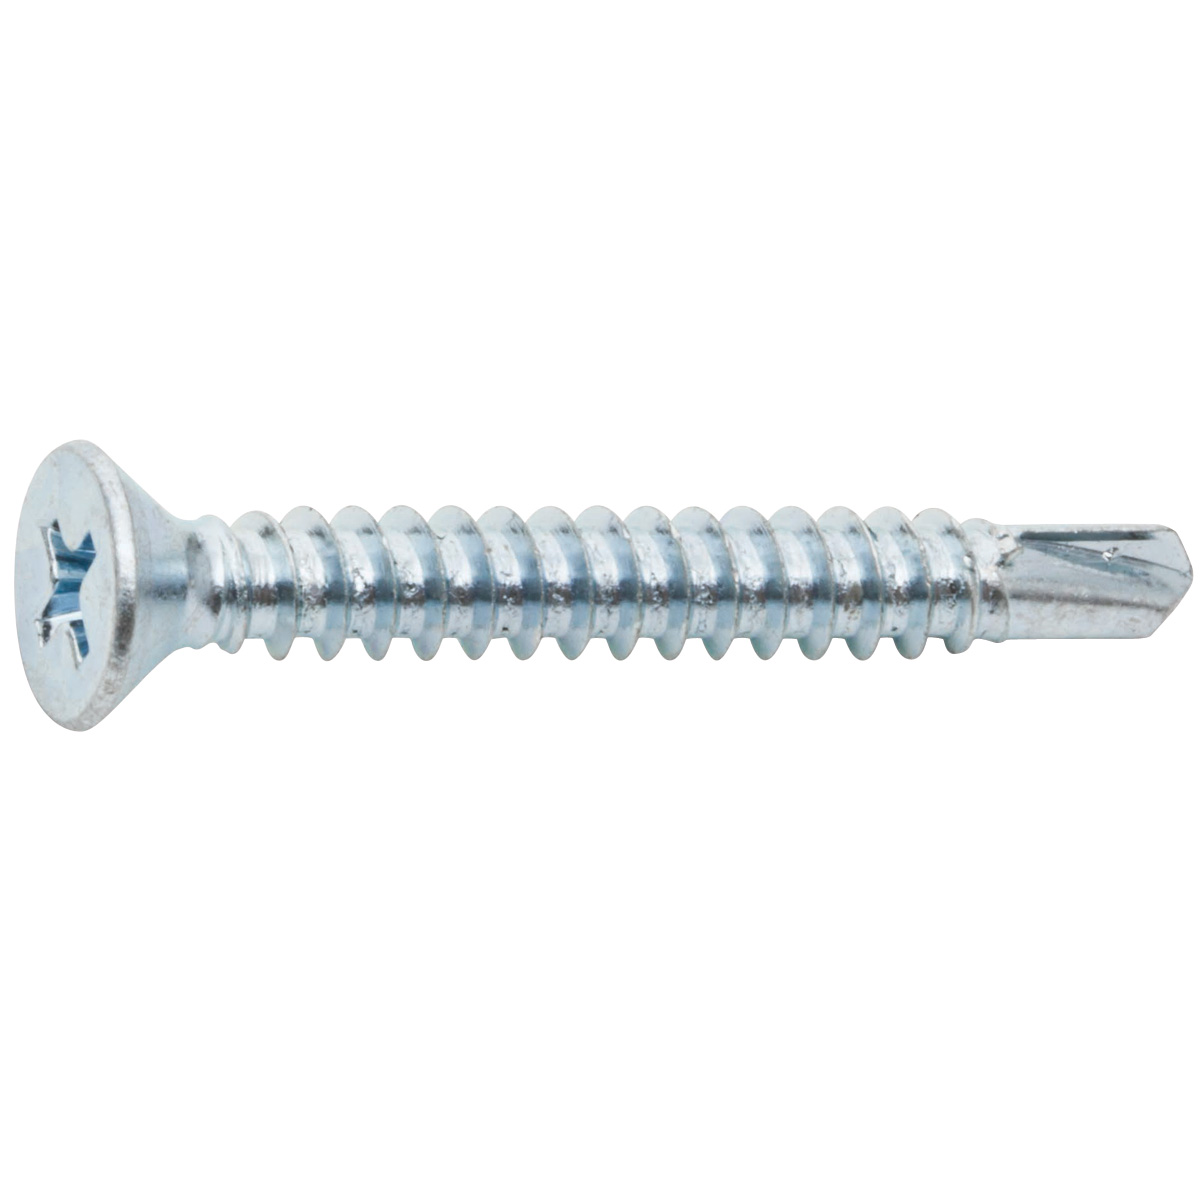 Pack of 25 18-8 Stainless Steel Self-Drilling Screw Plain Finish Phillips Drive Pack of 25 1-1/4 Length #10-16 Thread Size Undercut 82 Degree Flat Head #3 Drill Point Small Parts 1020KPU188 1-1/4 Length